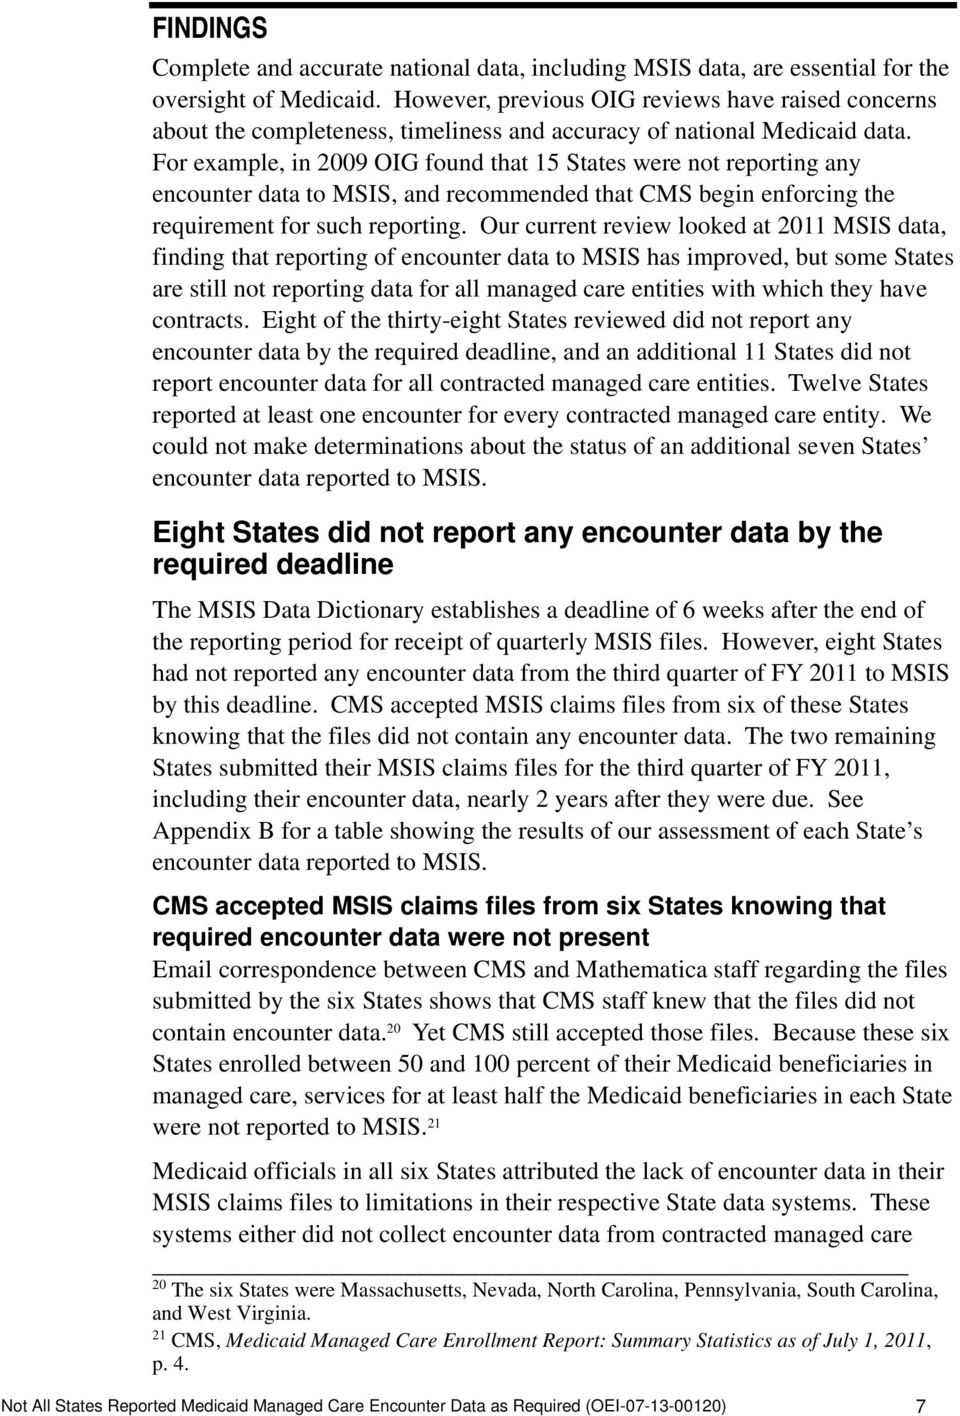 For example, in 2009 OIG found that 15 States were not reporting any encounter data to MSIS, and recommended that CMS begin enforcing the requirement for such reporting.